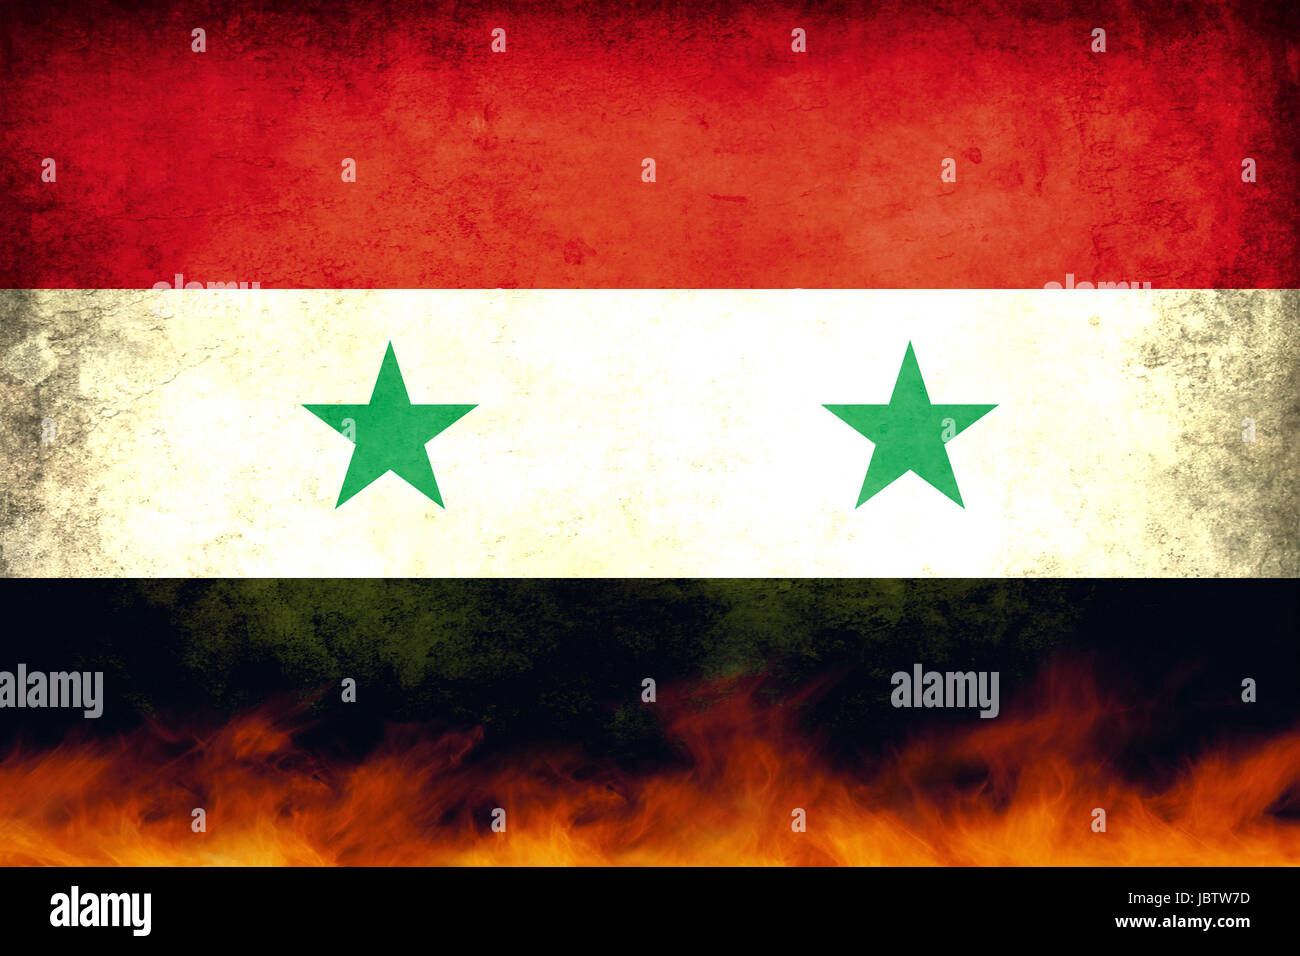 A damaged and burning Syria conflict flag Stock Photo